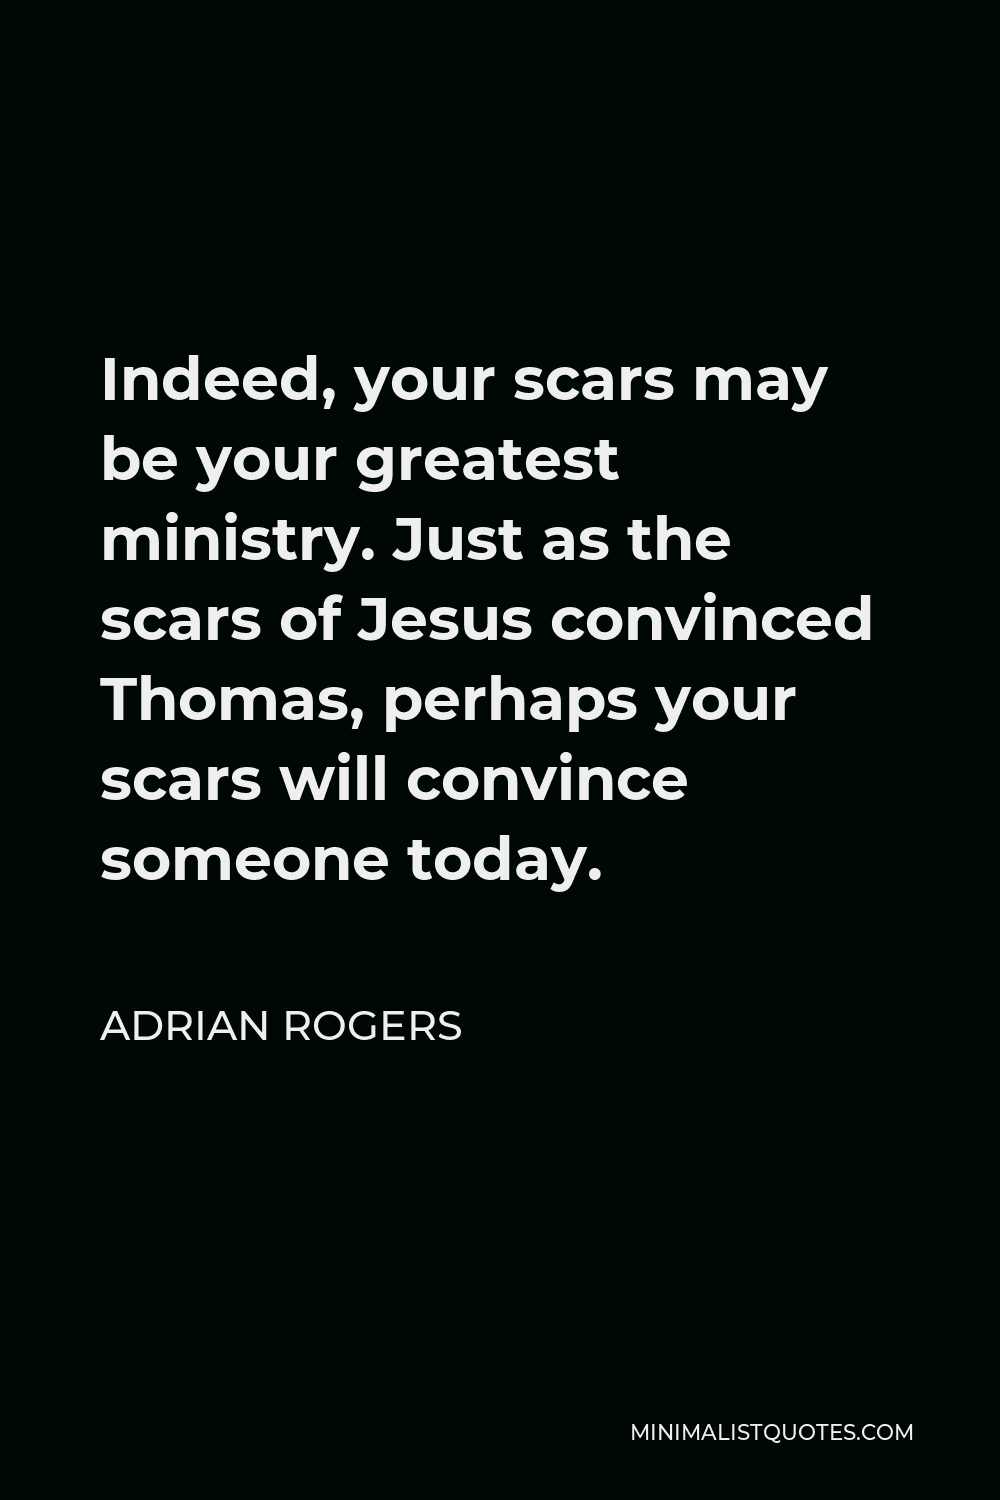 Adrian Rogers Quote - Indeed, your scars may be your greatest ministry. Just as the scars of Jesus convinced Thomas, perhaps your scars will convince someone today.